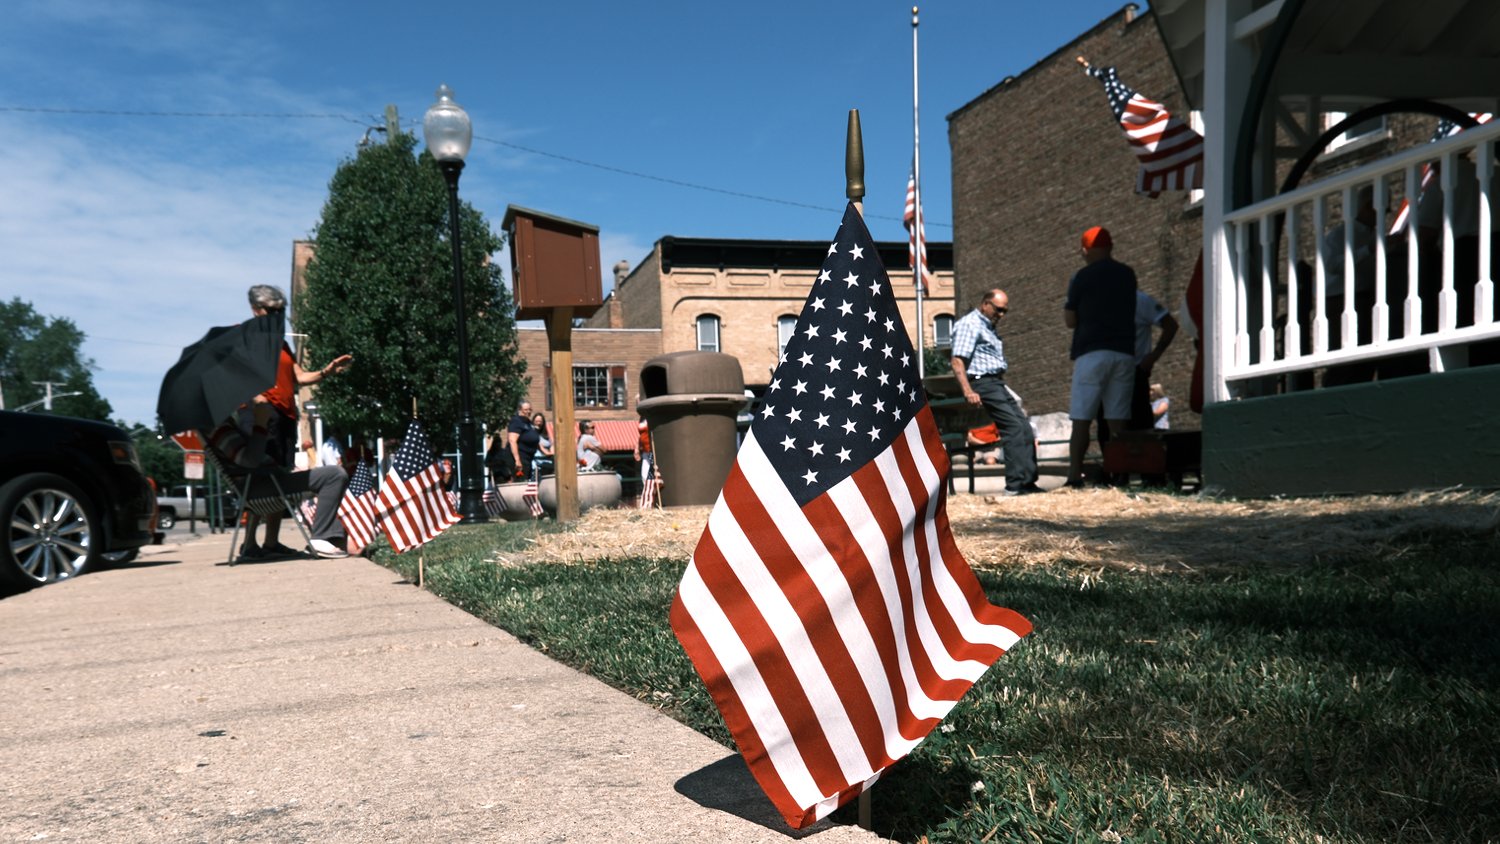 Flags lining the sidewalk at Stevens Park in Richmond, Illinois for the Memorial Day service.